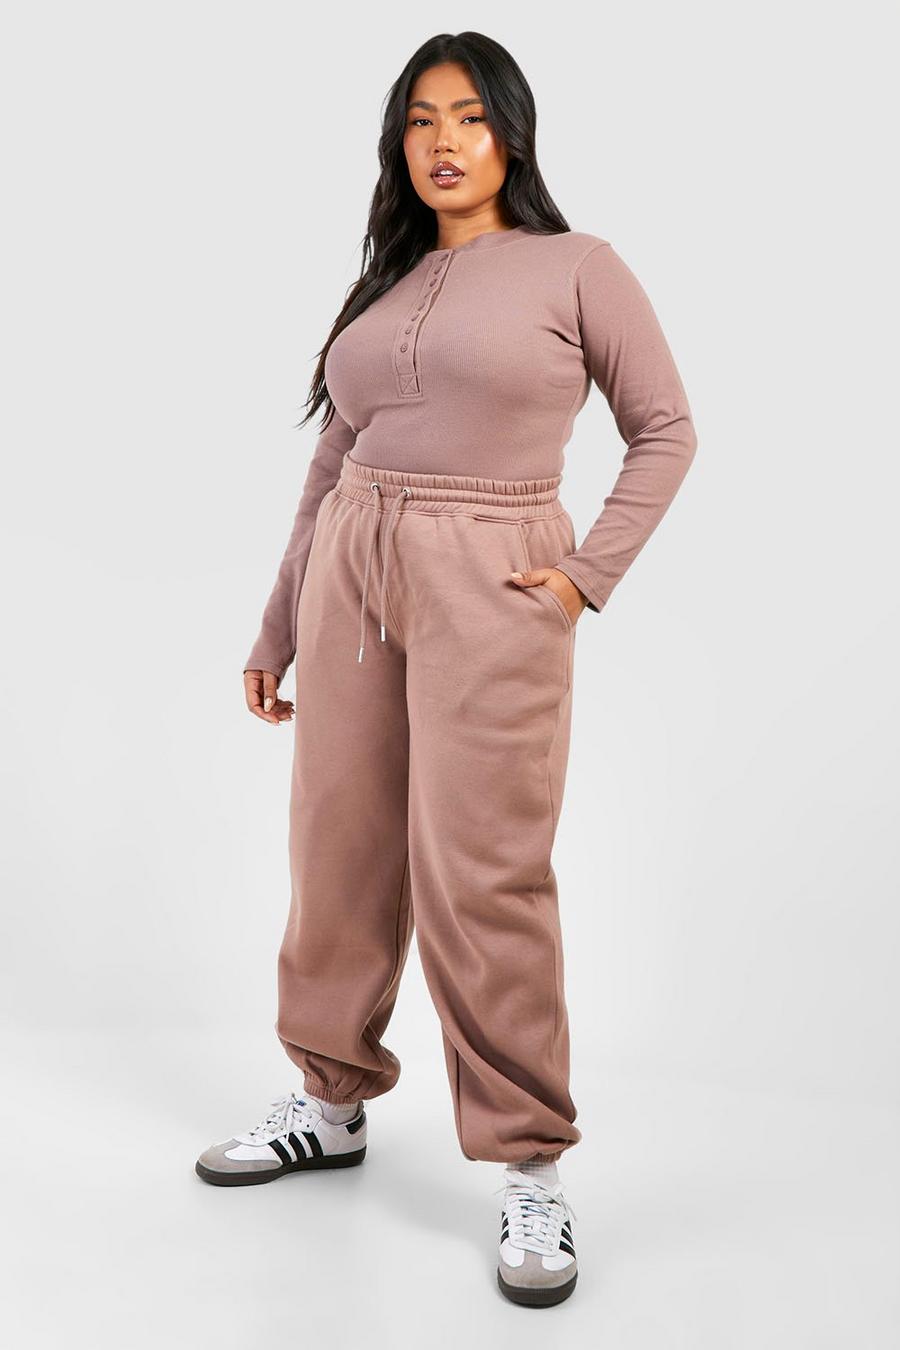 Plus Button Detail Bodysuit And Cuffed Oversized Jogger Set